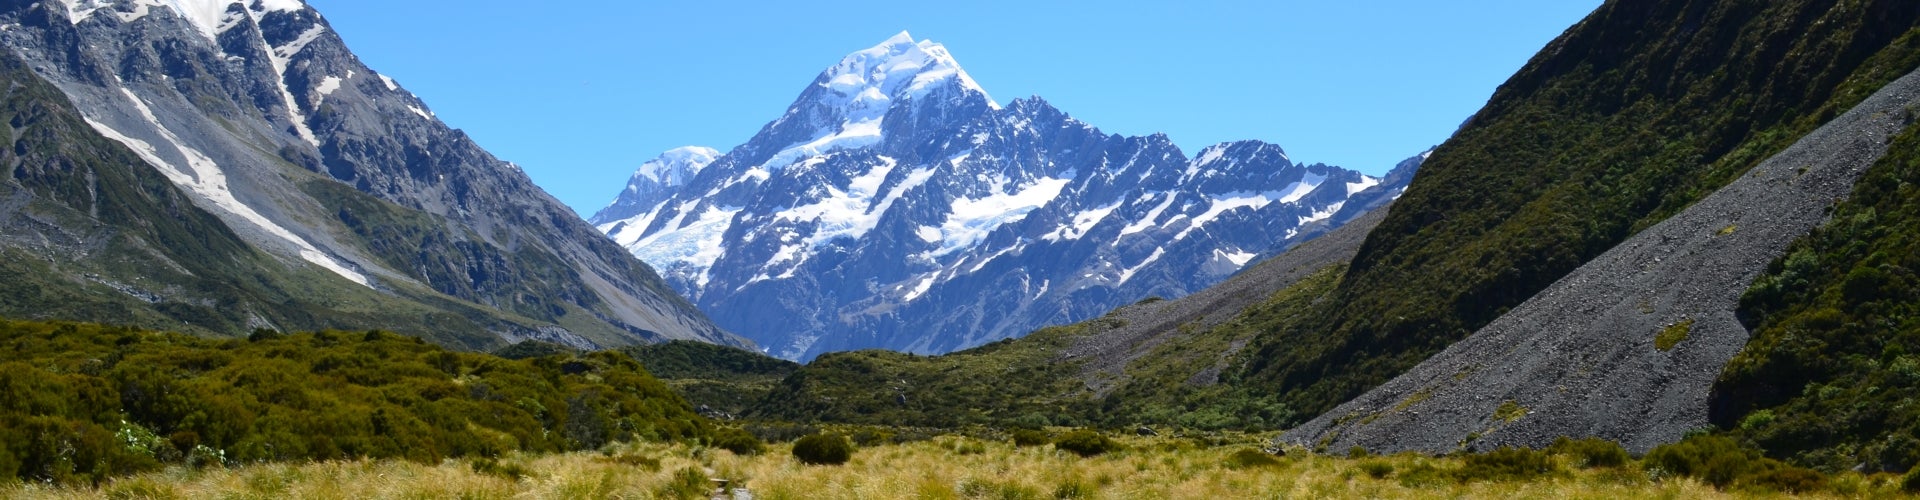 A mountain view of Mt. Cook, New Zealand. 